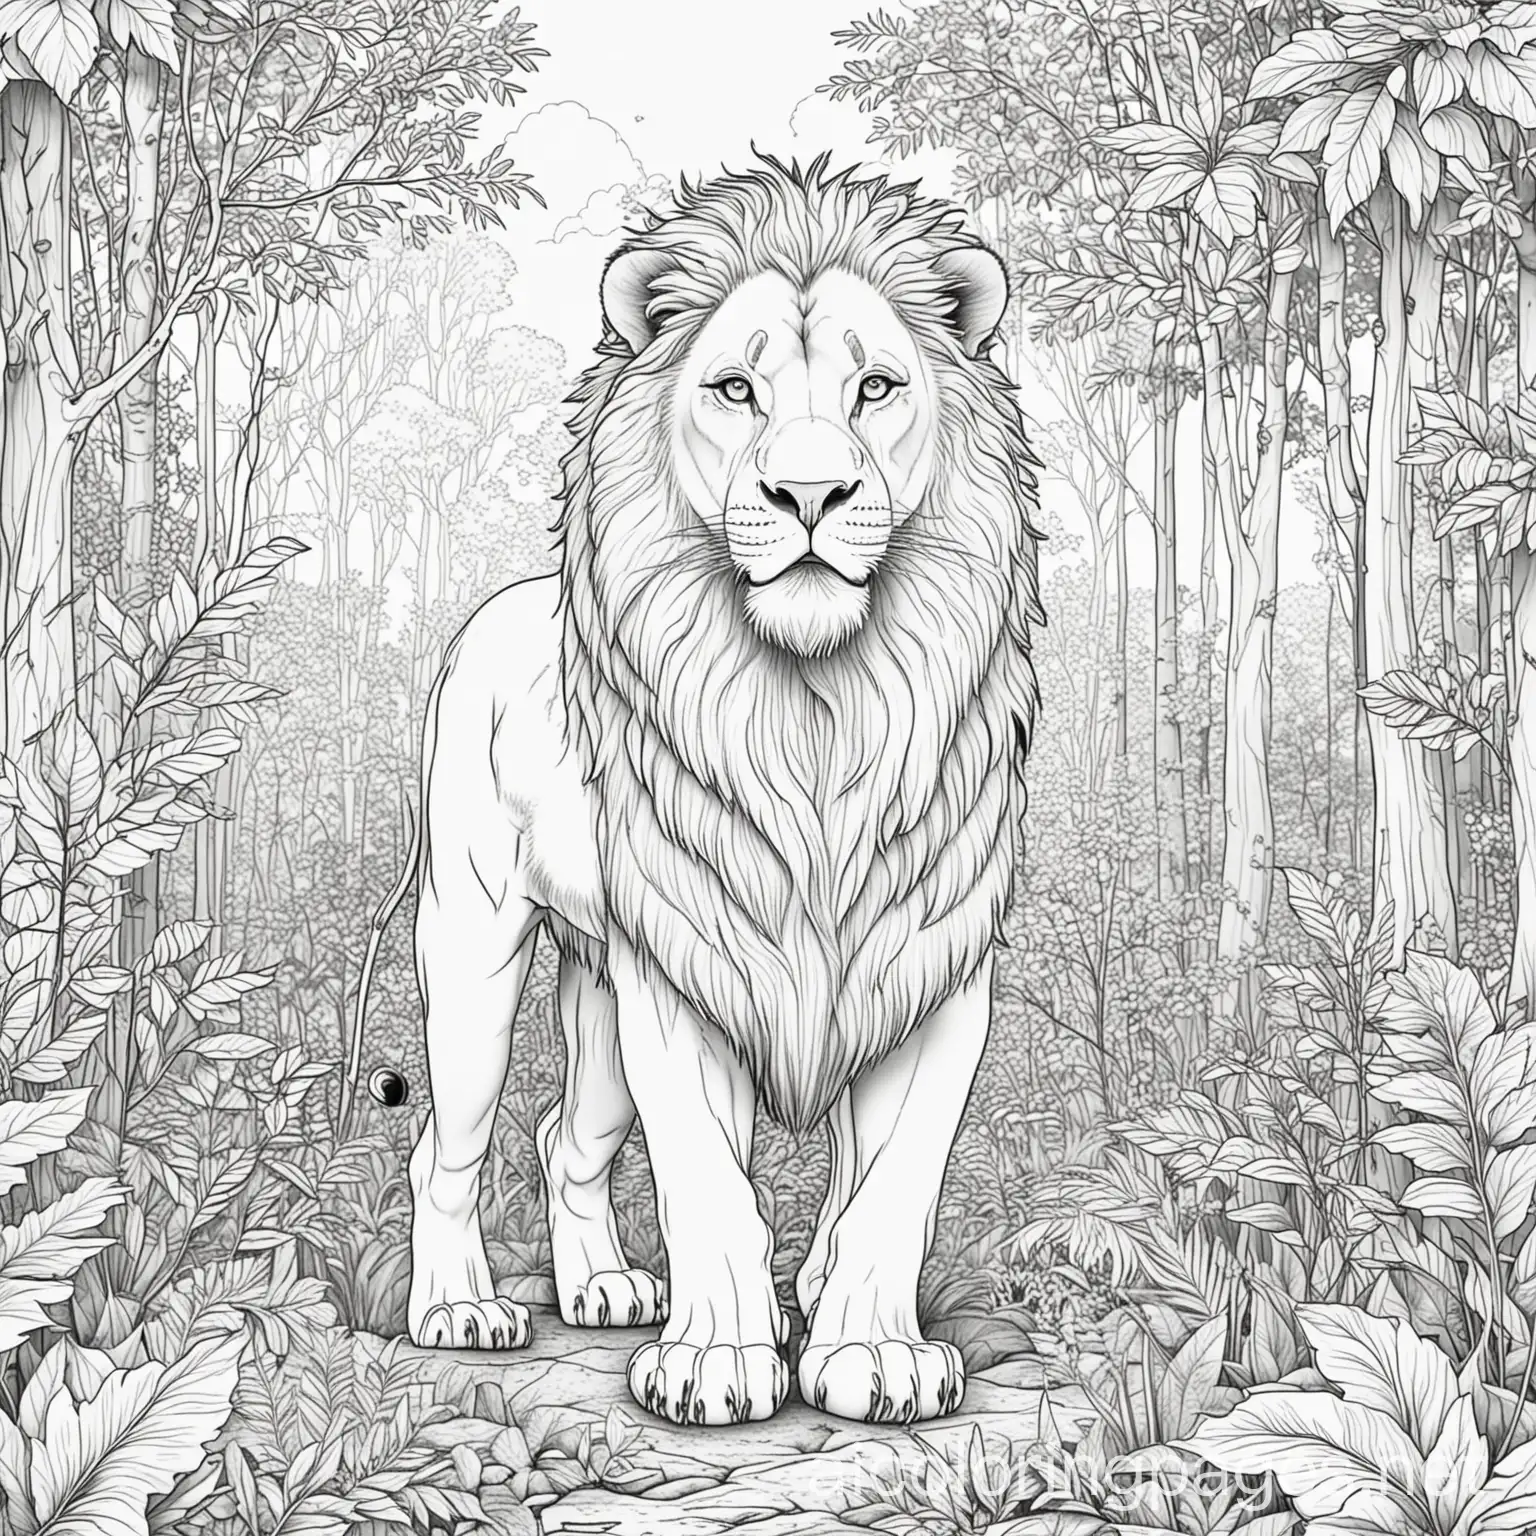 Lion in the forest, Coloring Page, black and white, line art, white background, Simplicity, Ample White Space. The background of the coloring page is plain white to make it easy for young children to color within the lines. The outlines of all the subjects are easy to distinguish, making it simple for kids to color without too much difficulty